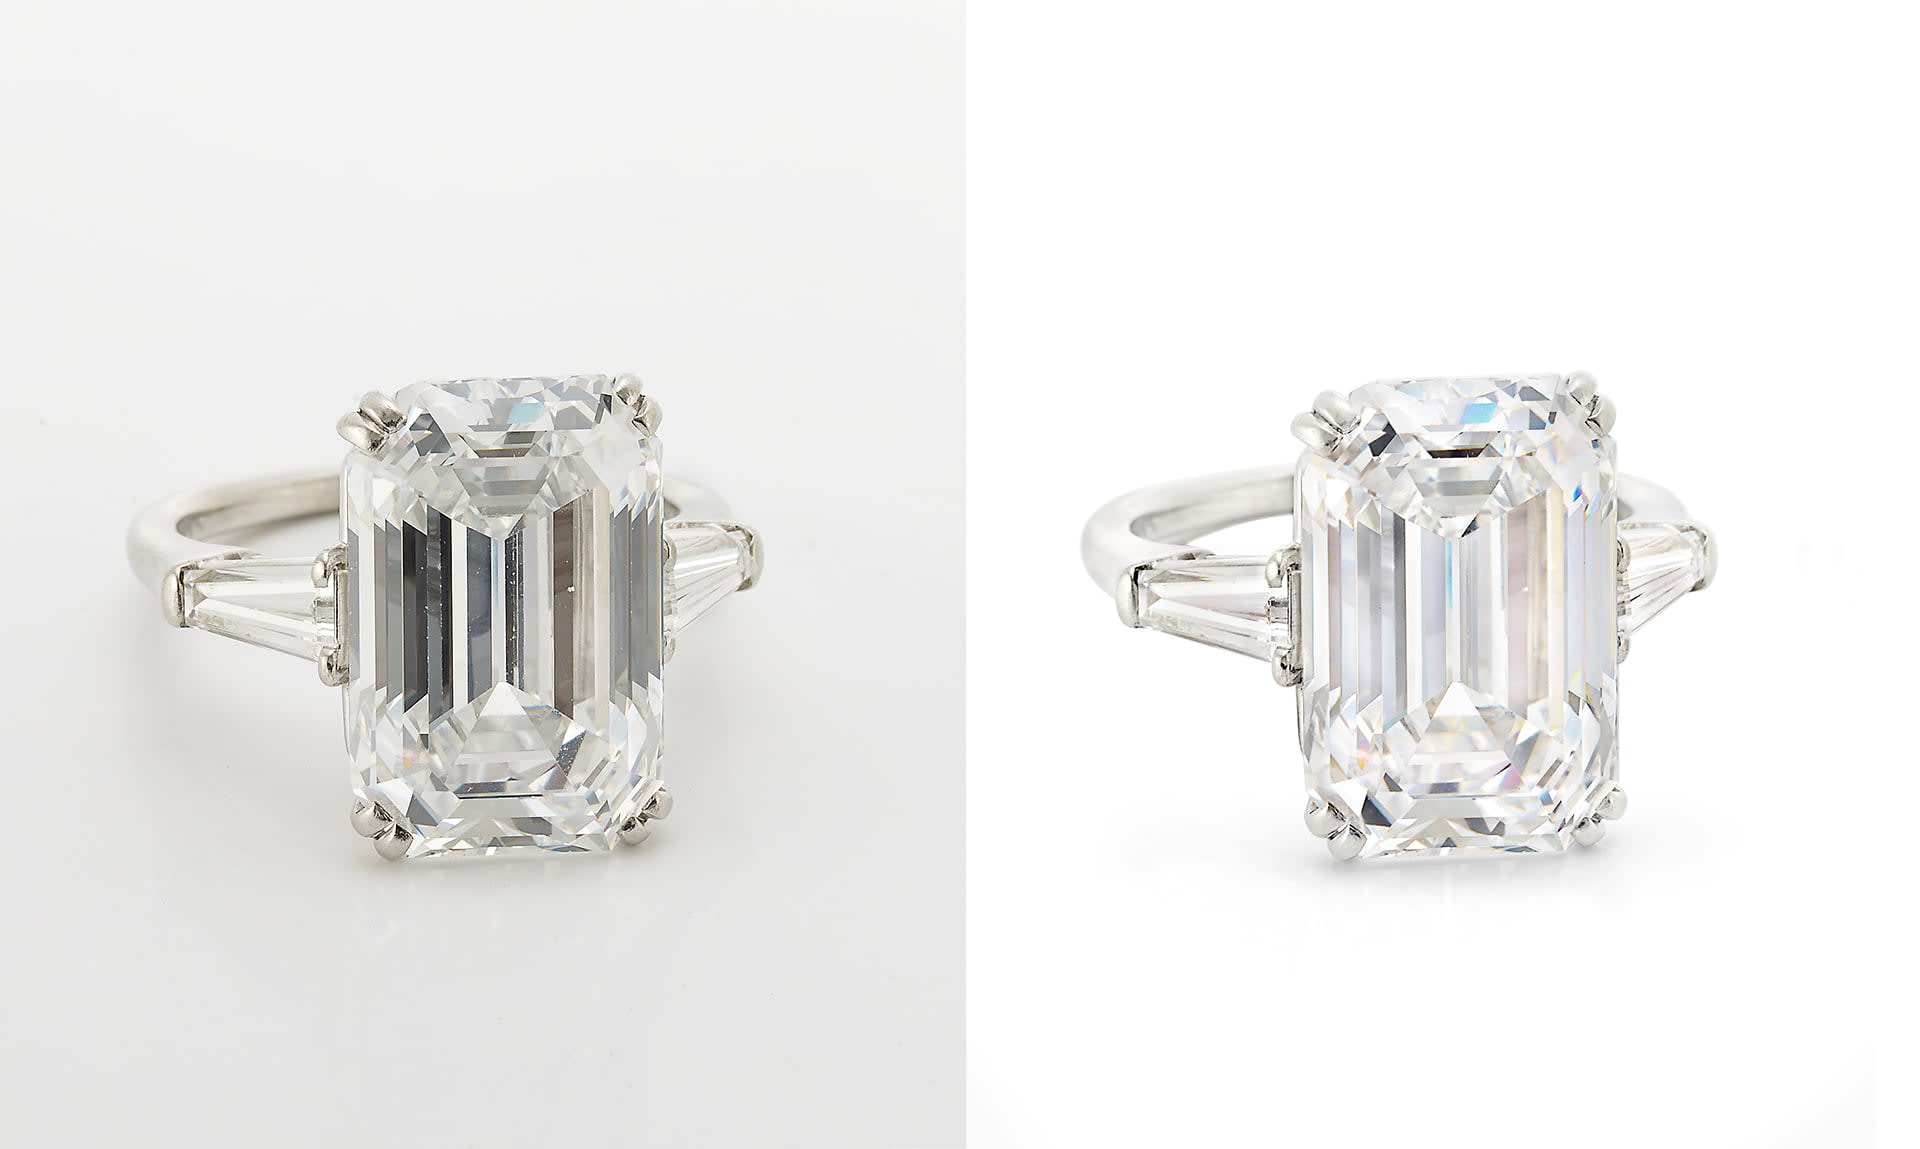 Jewelry Retouching Services Before and After Image 2